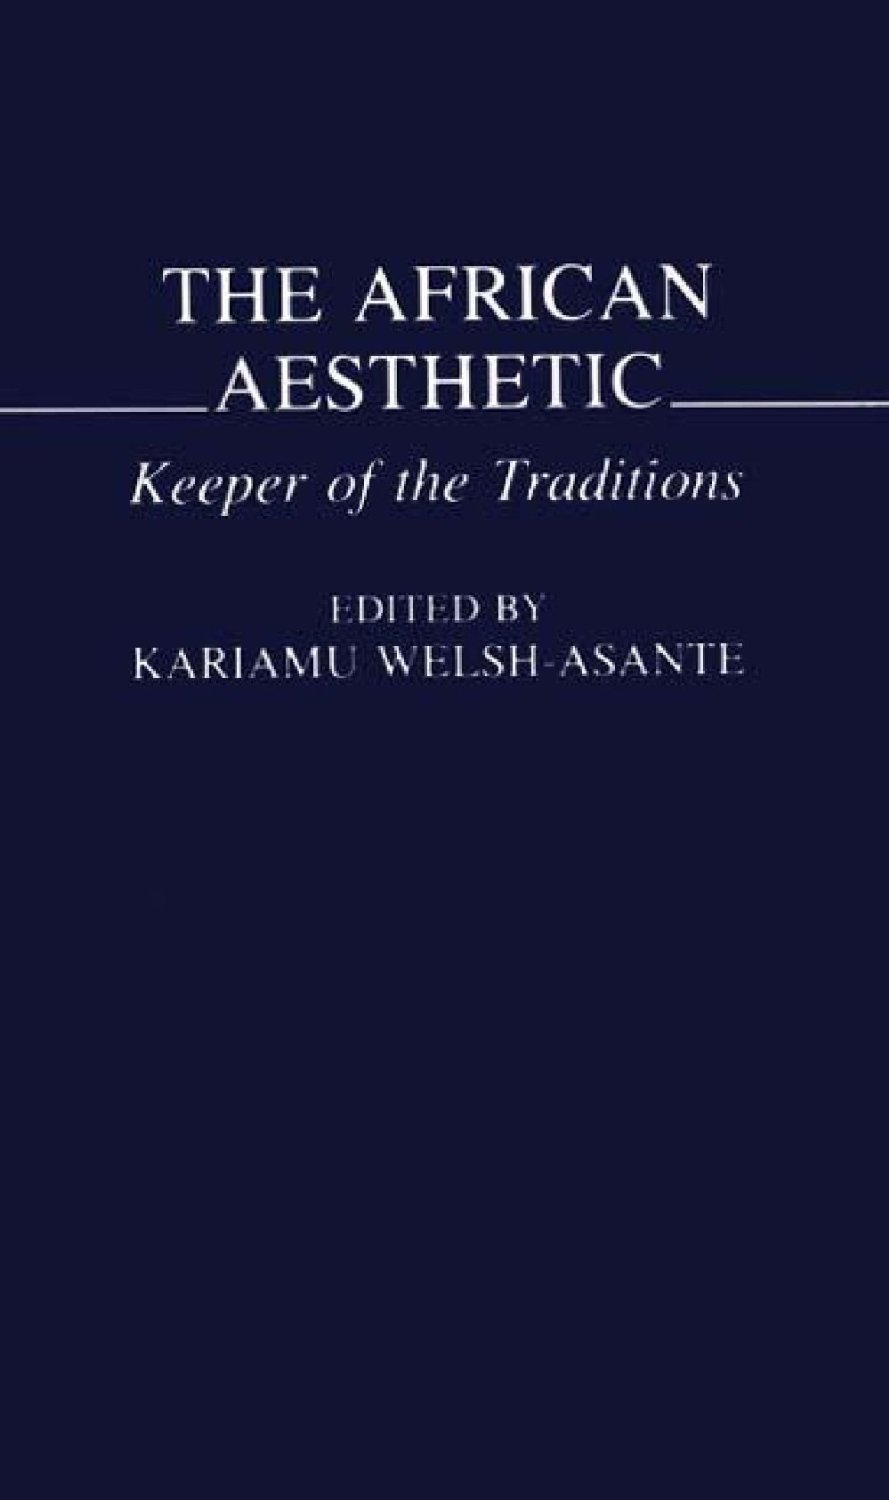 THE AFRICAN AESTHETIC: KEEPER OF THE TRADITION